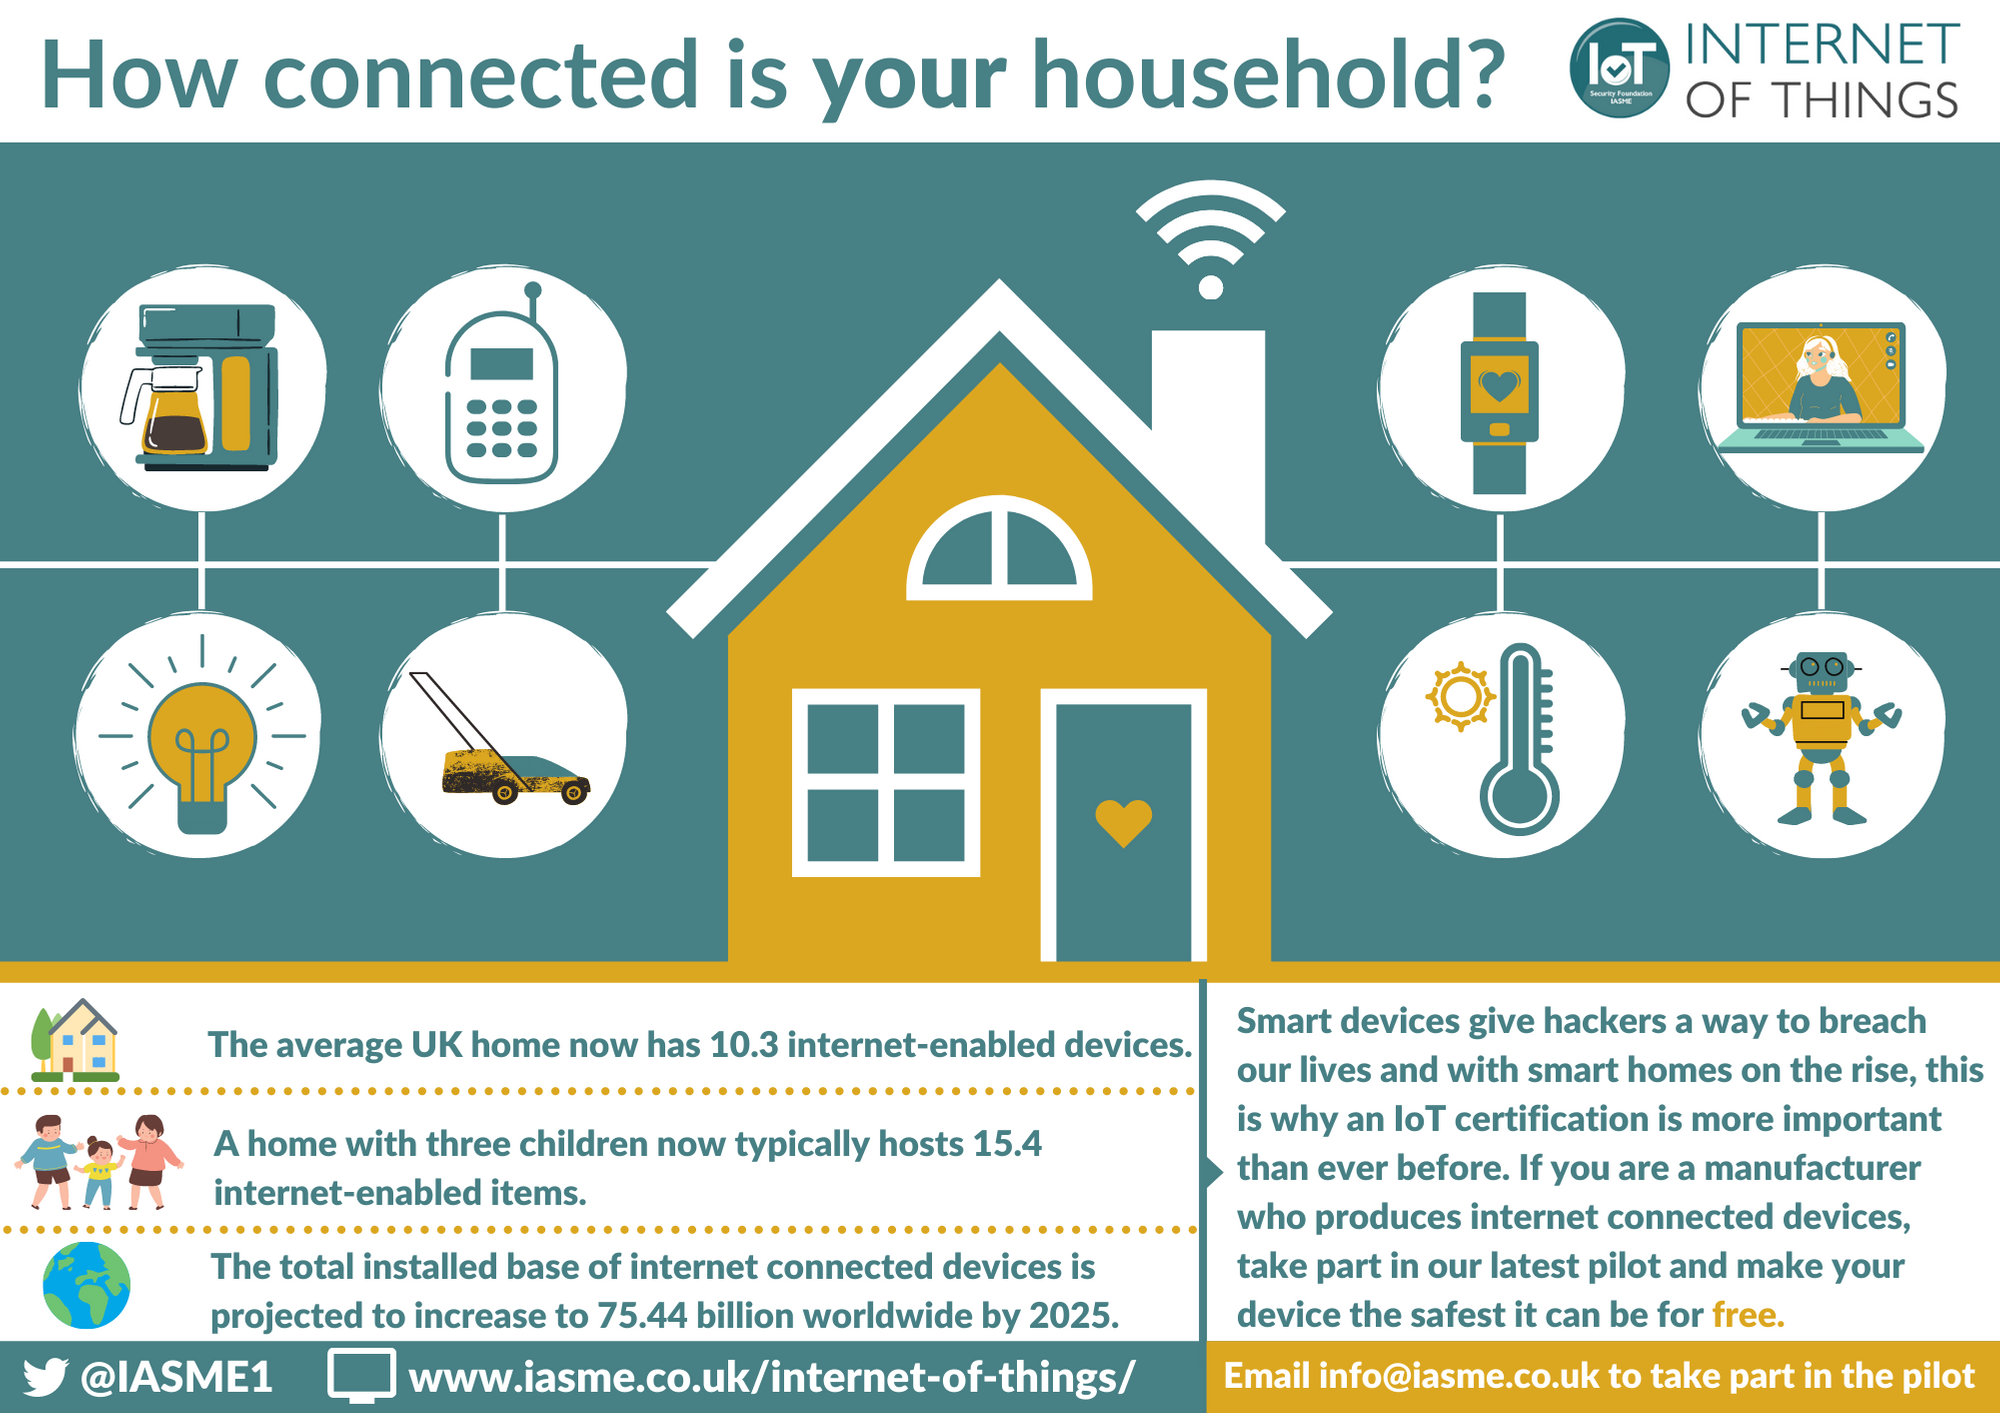 Internet of Things Infographic